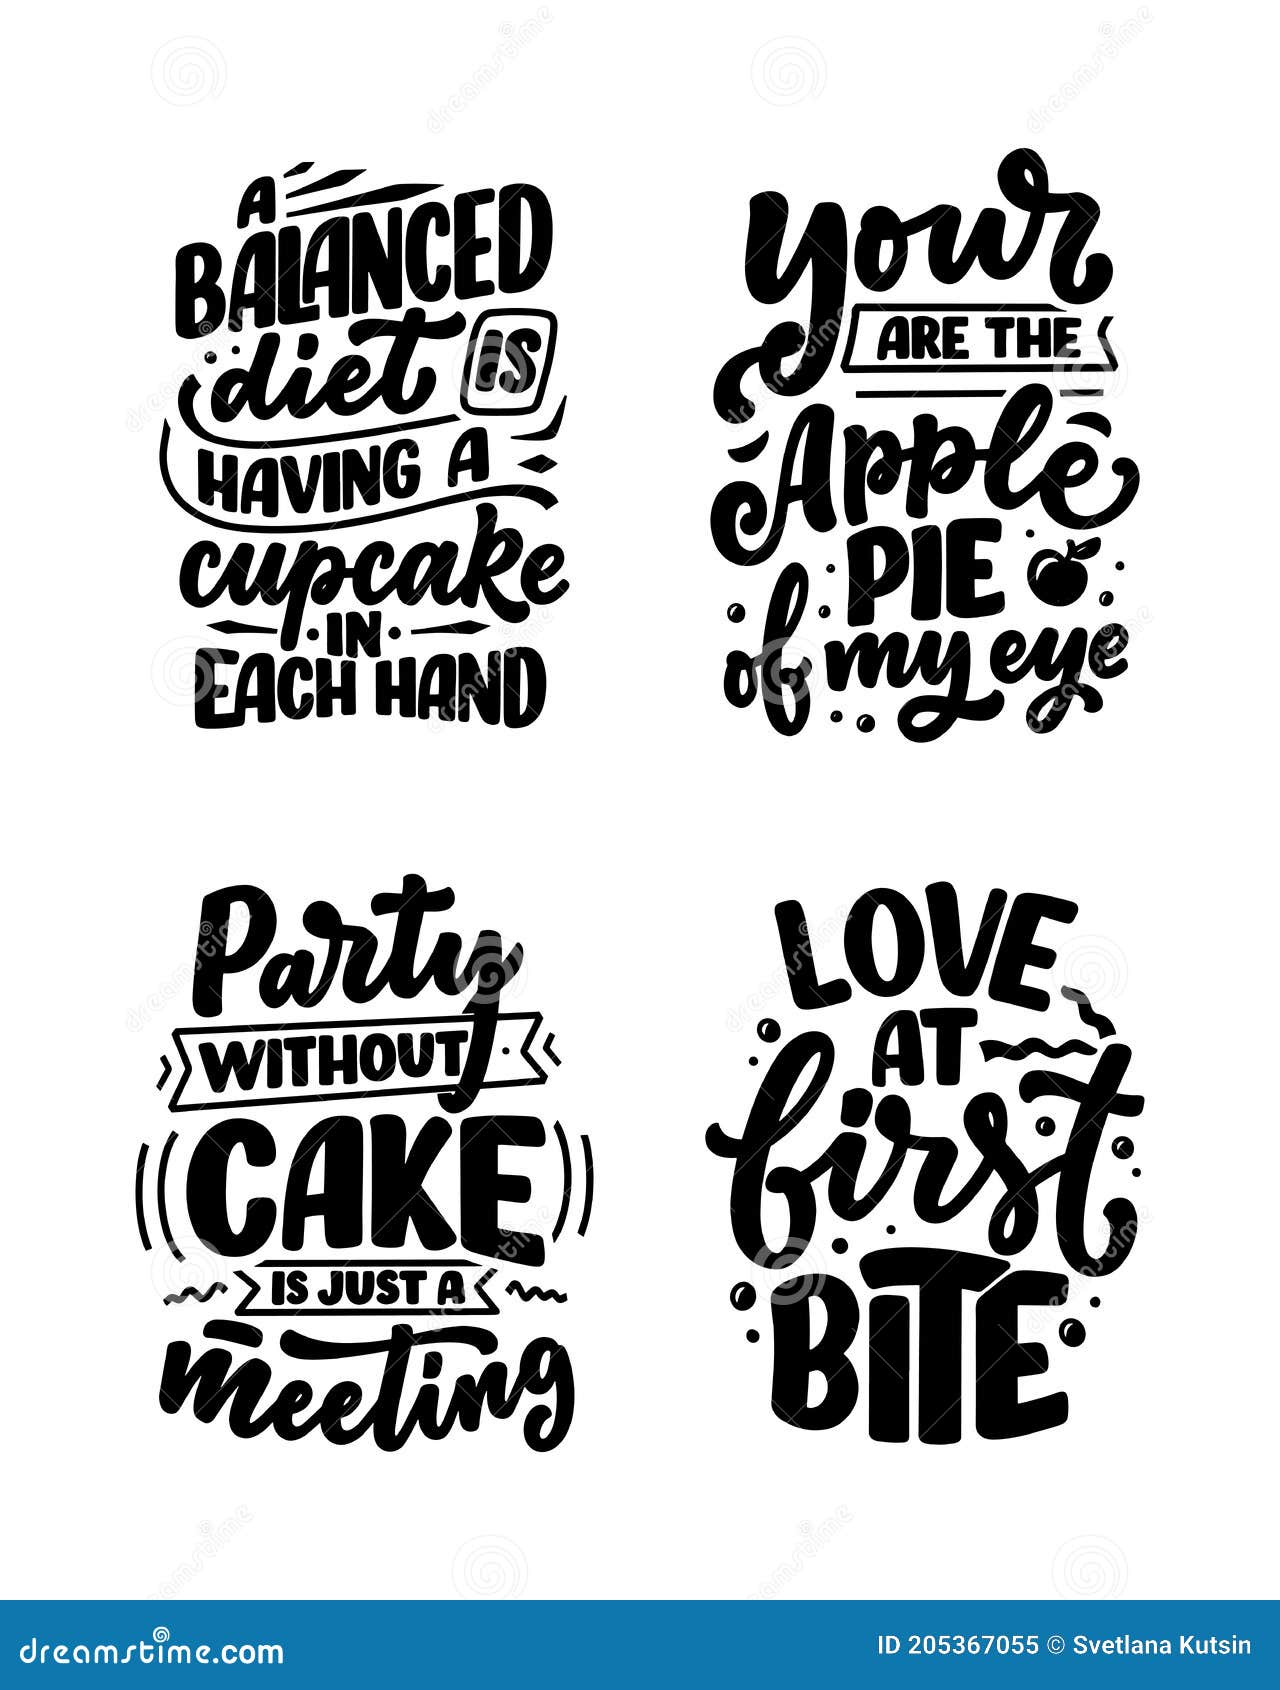 Funny Sayings, Inspirational Quotes for Cafe or Bakery Print. Funny Brush  Calligraphy Stock Illustration - Illustration of chalkboard, card: 205367055